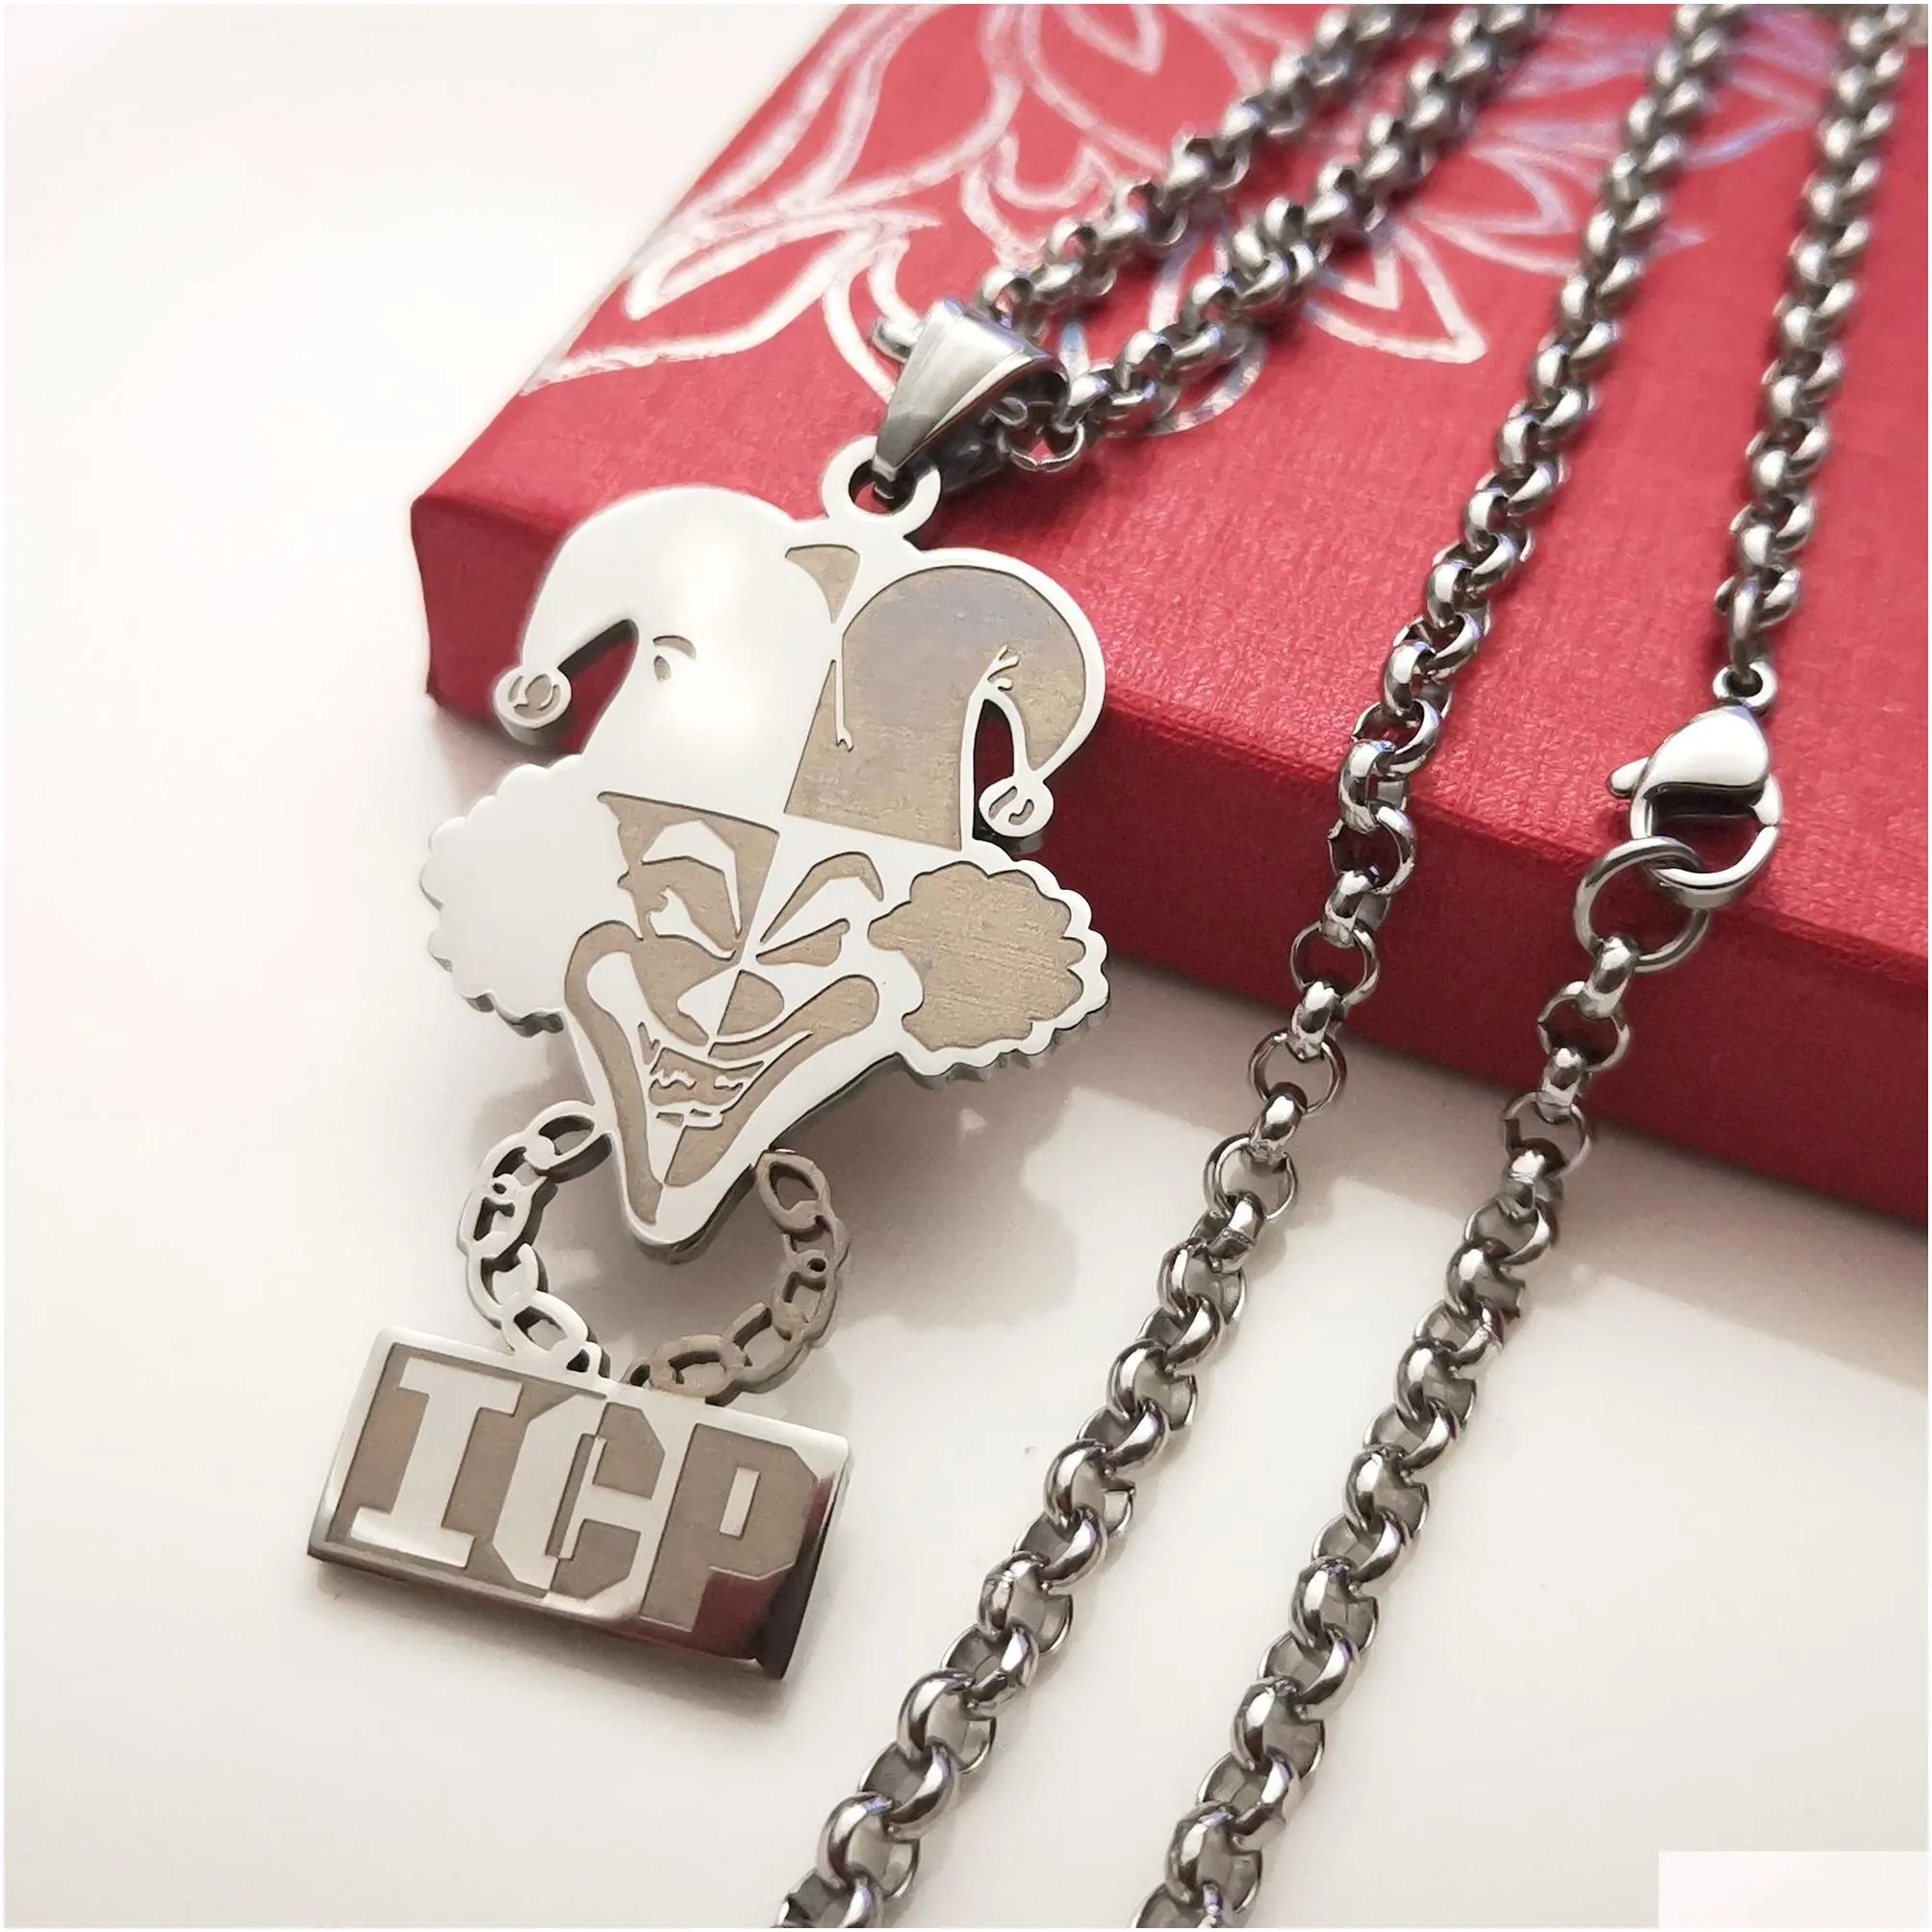 High Polished Silver Stainless Steel ICP CLOWN TWIZTID PENDANT CHARM NECKLACE 4mm 24INCH Rolo CHAIN Jugallo for Mens238Z